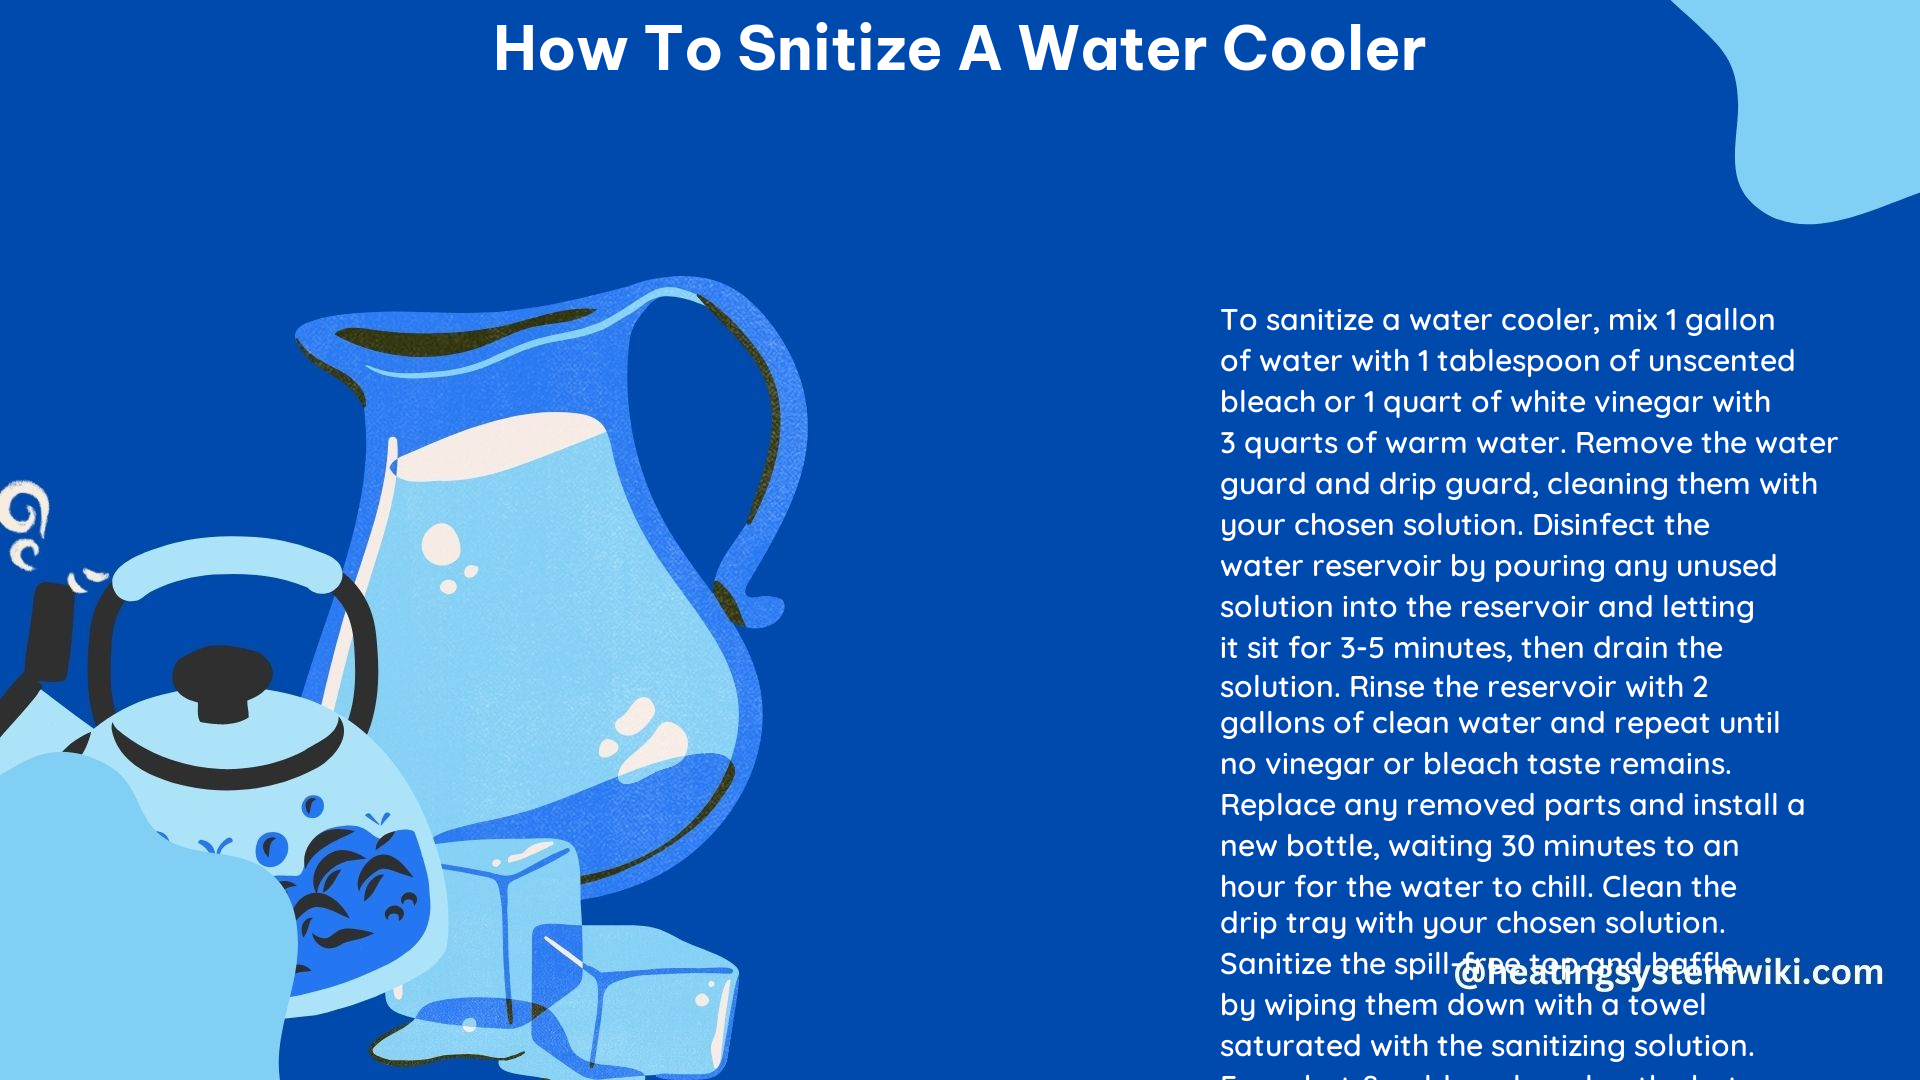 How to Snitize a Water Cooler